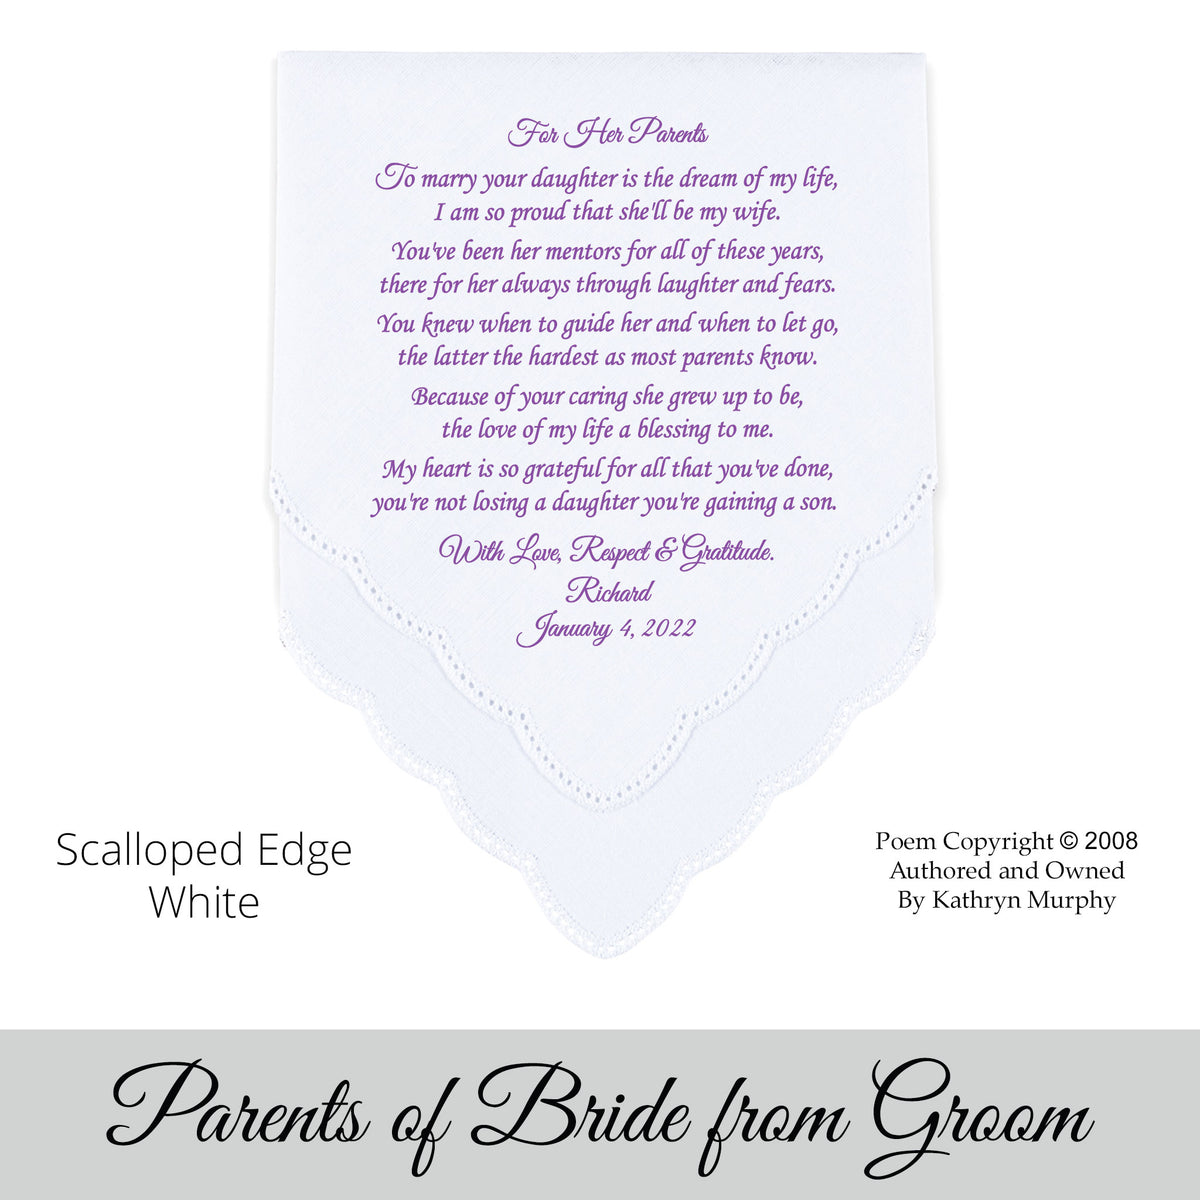 Gift for the parents of the bride from the groom. Printed wedding hankie 